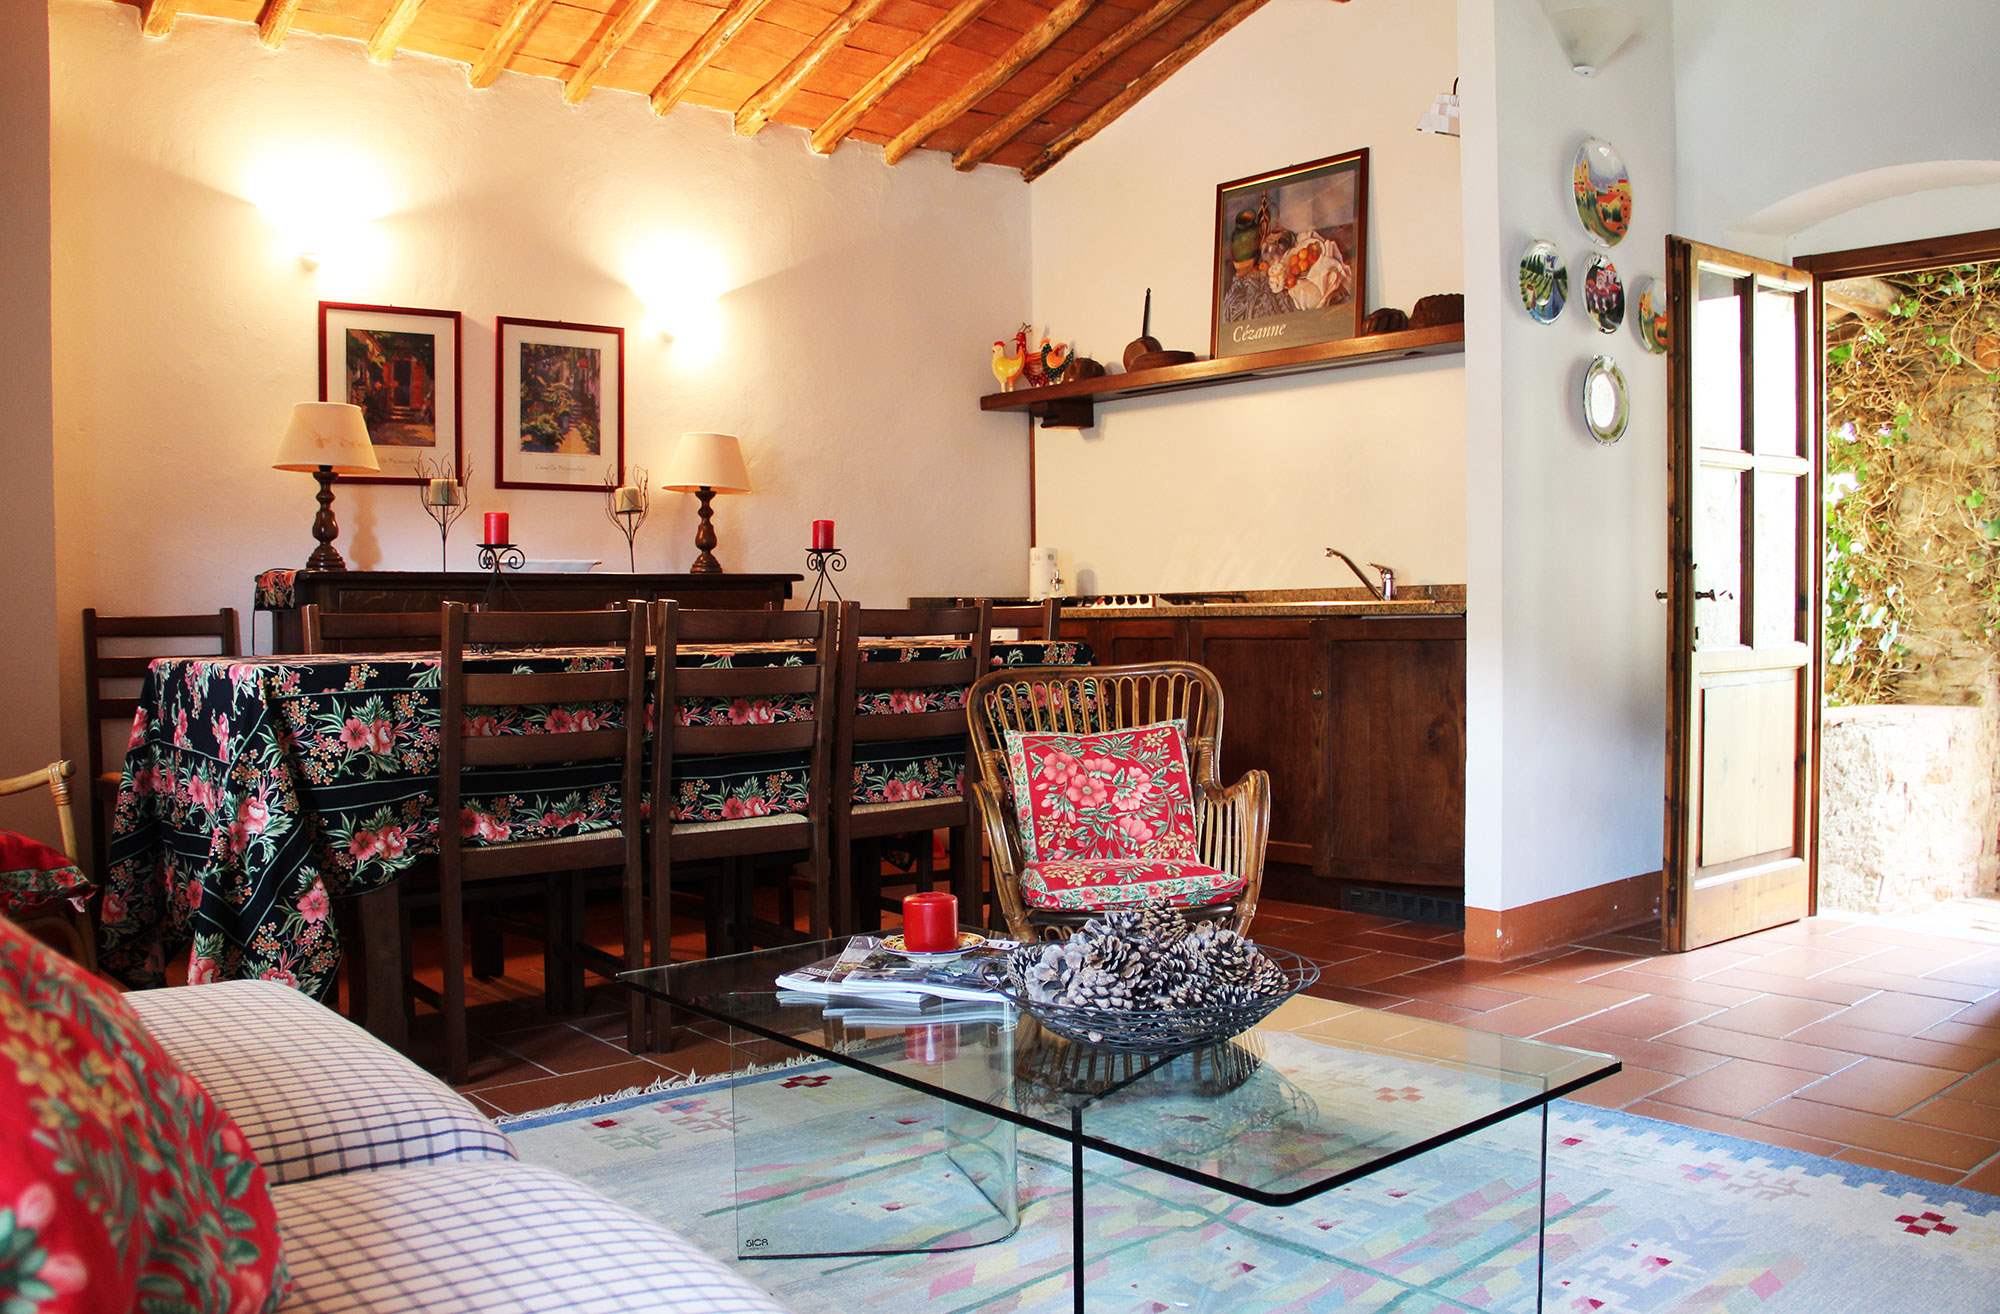 Villa Felicita, Main house and apartment, 10 persons rate, 5 bedroom villa in Chianti & Countryside, Tuscany Photo #24